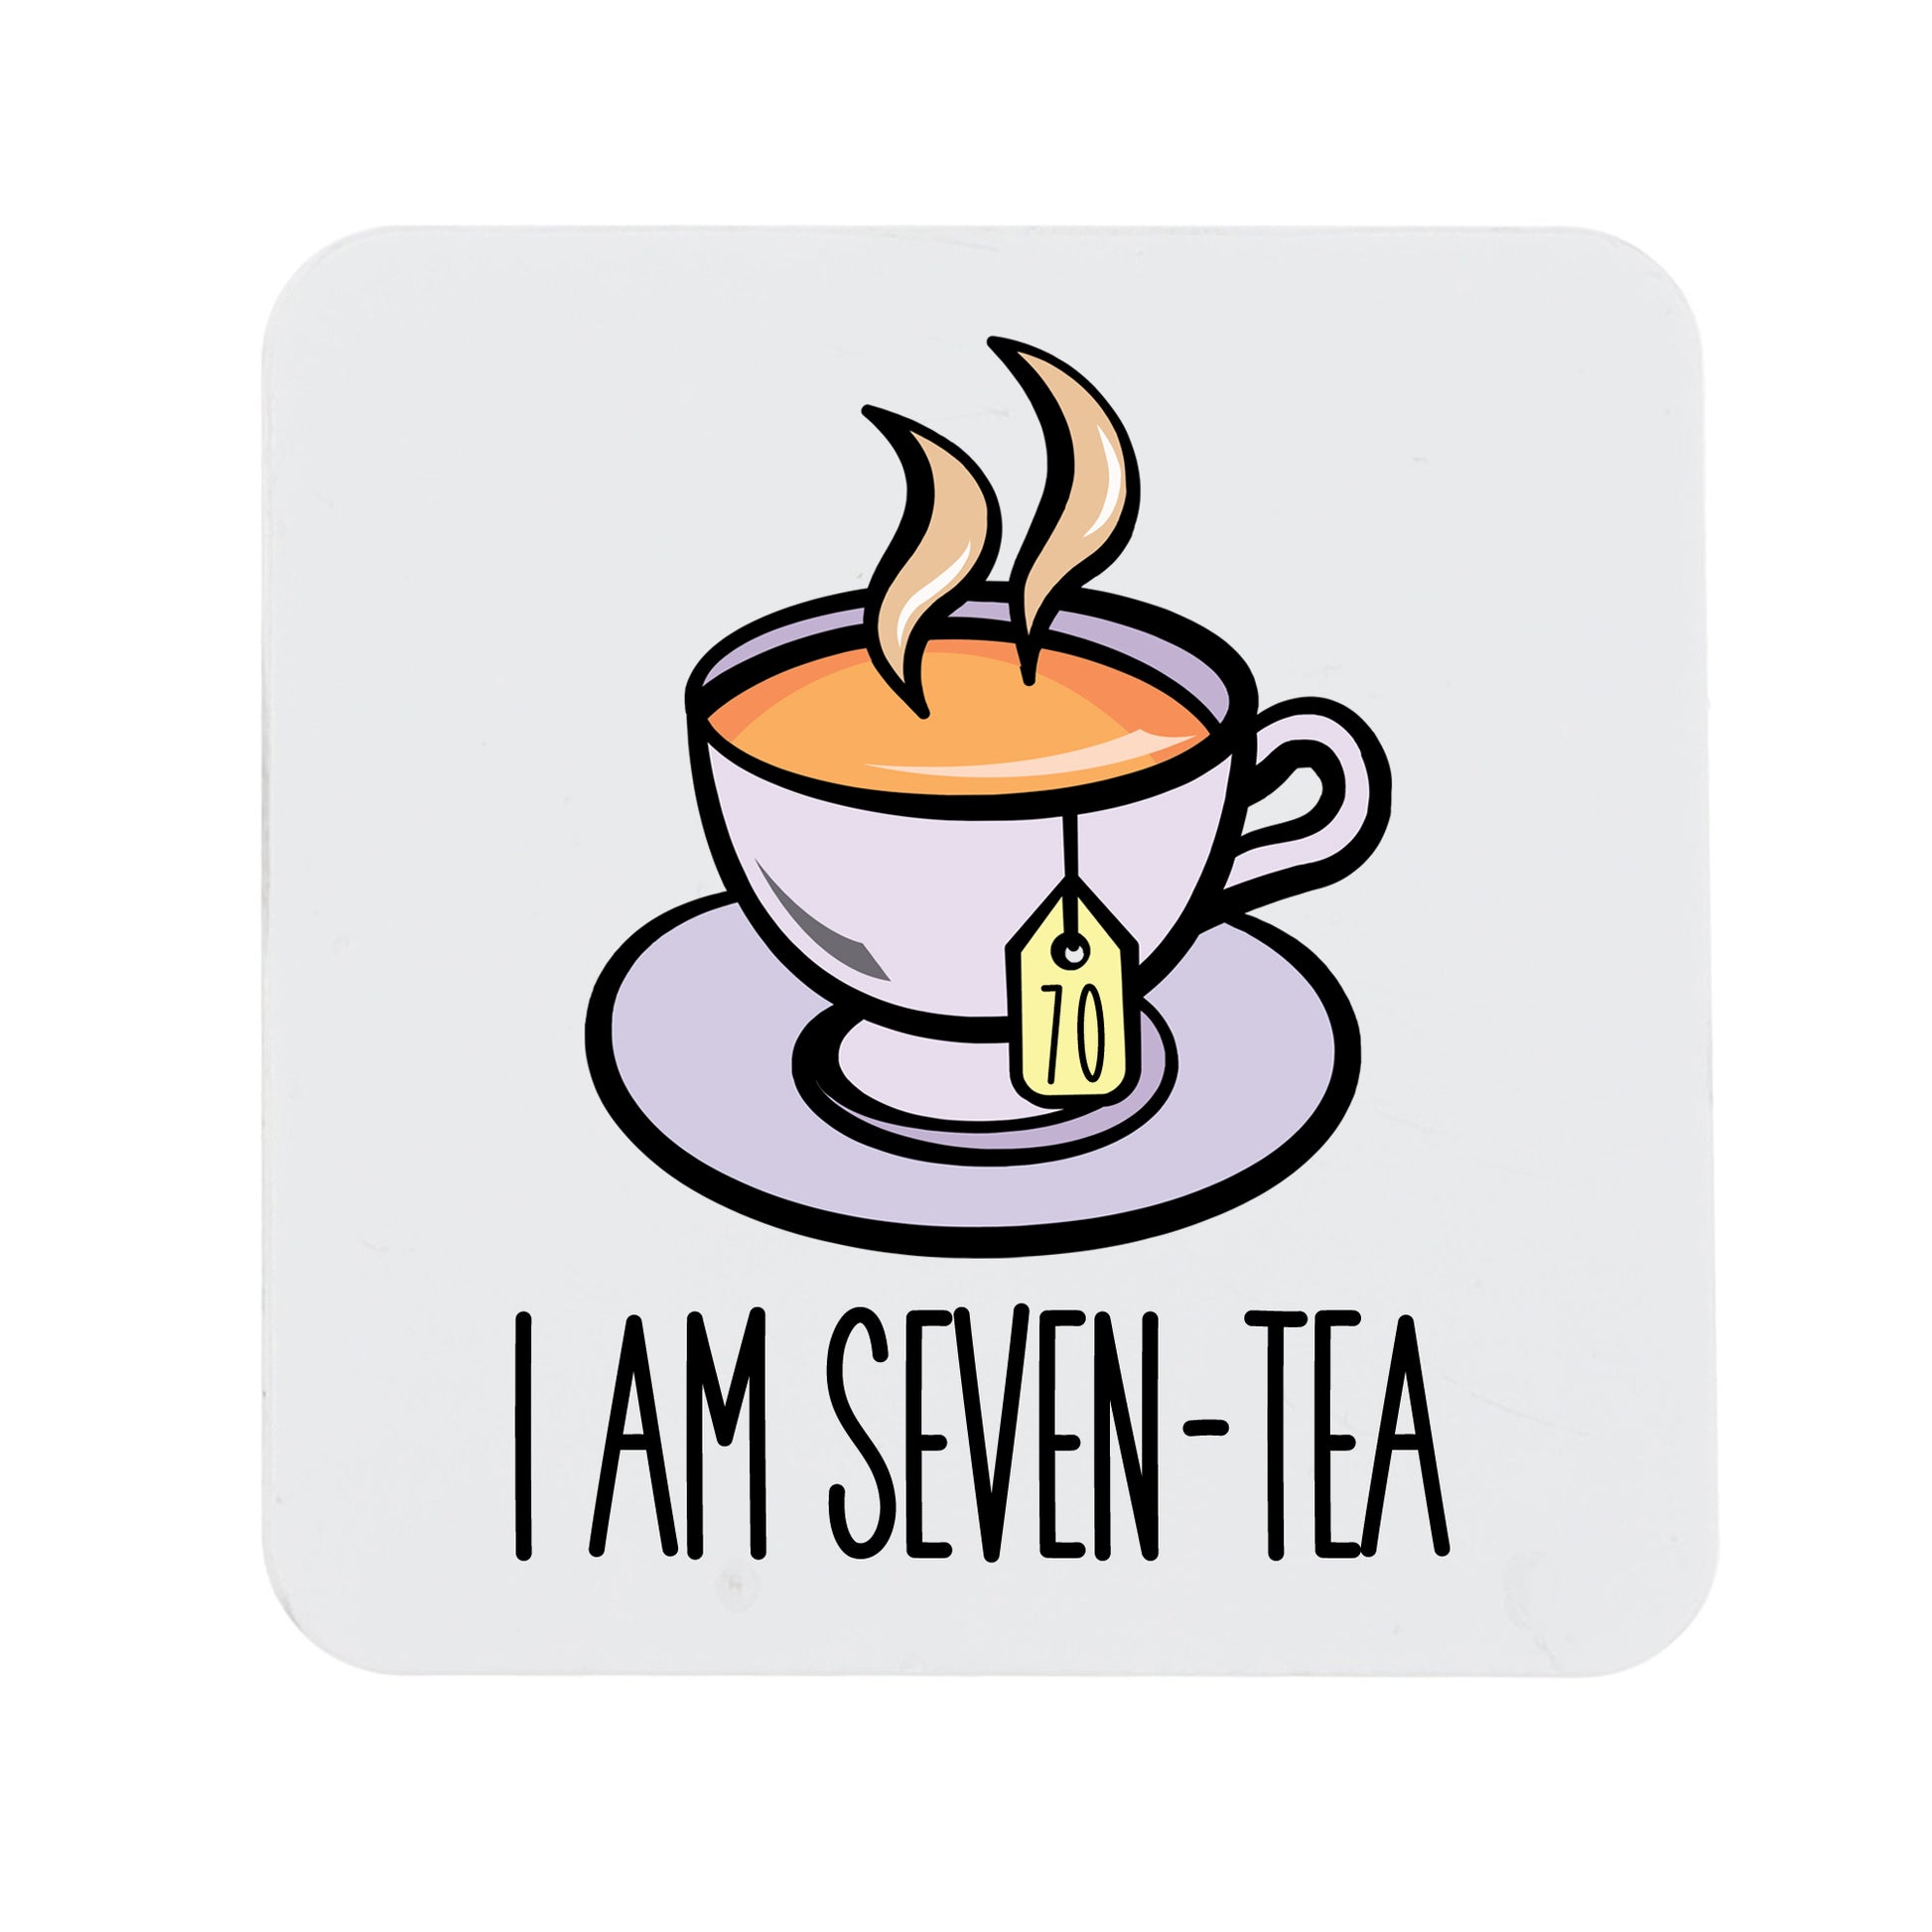 I Am Seven-Tea Funny 70th Birthday Mug Gift for Tea Lovers  - Always Looking Good - Printed Coaster Only  